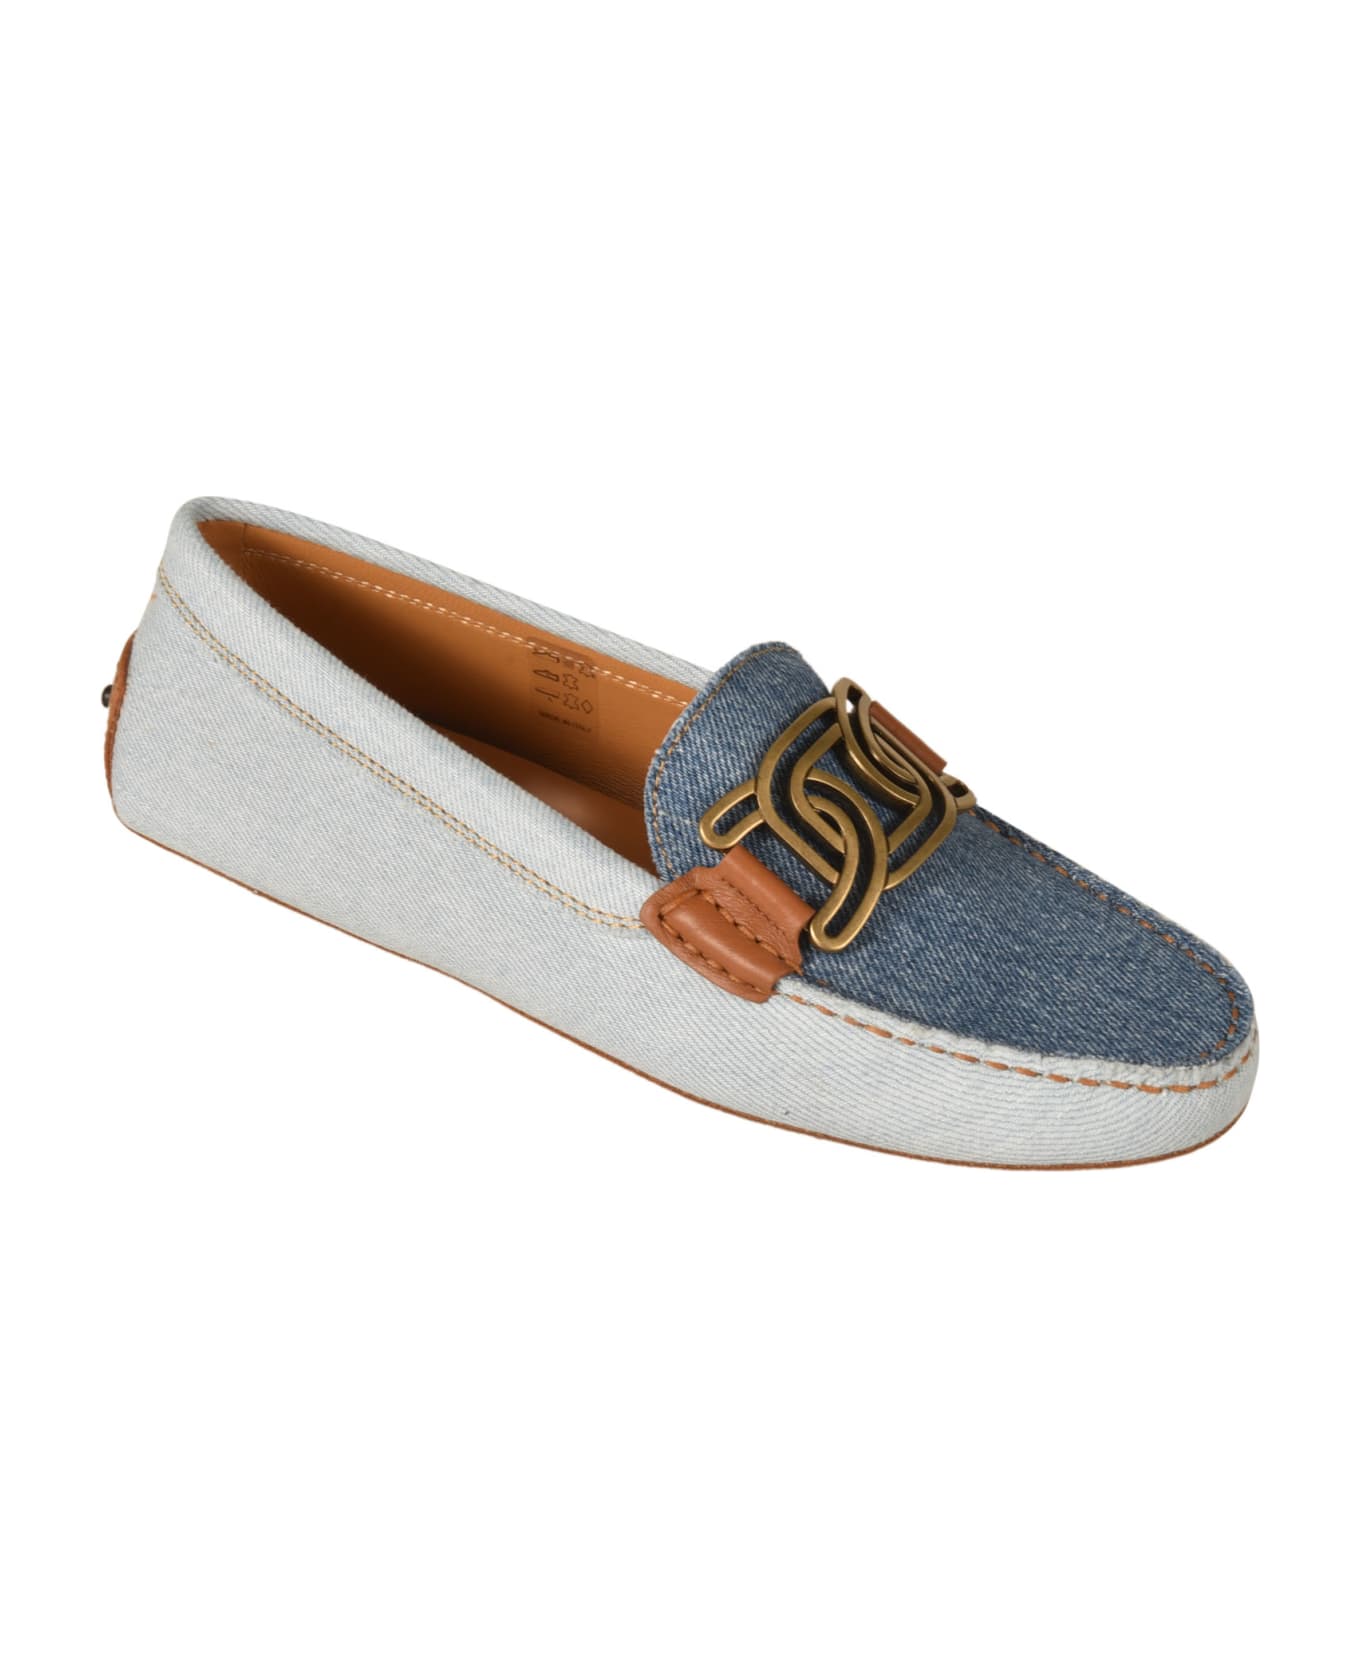 Tod's Catena Firate Jeans Loafers - Blue